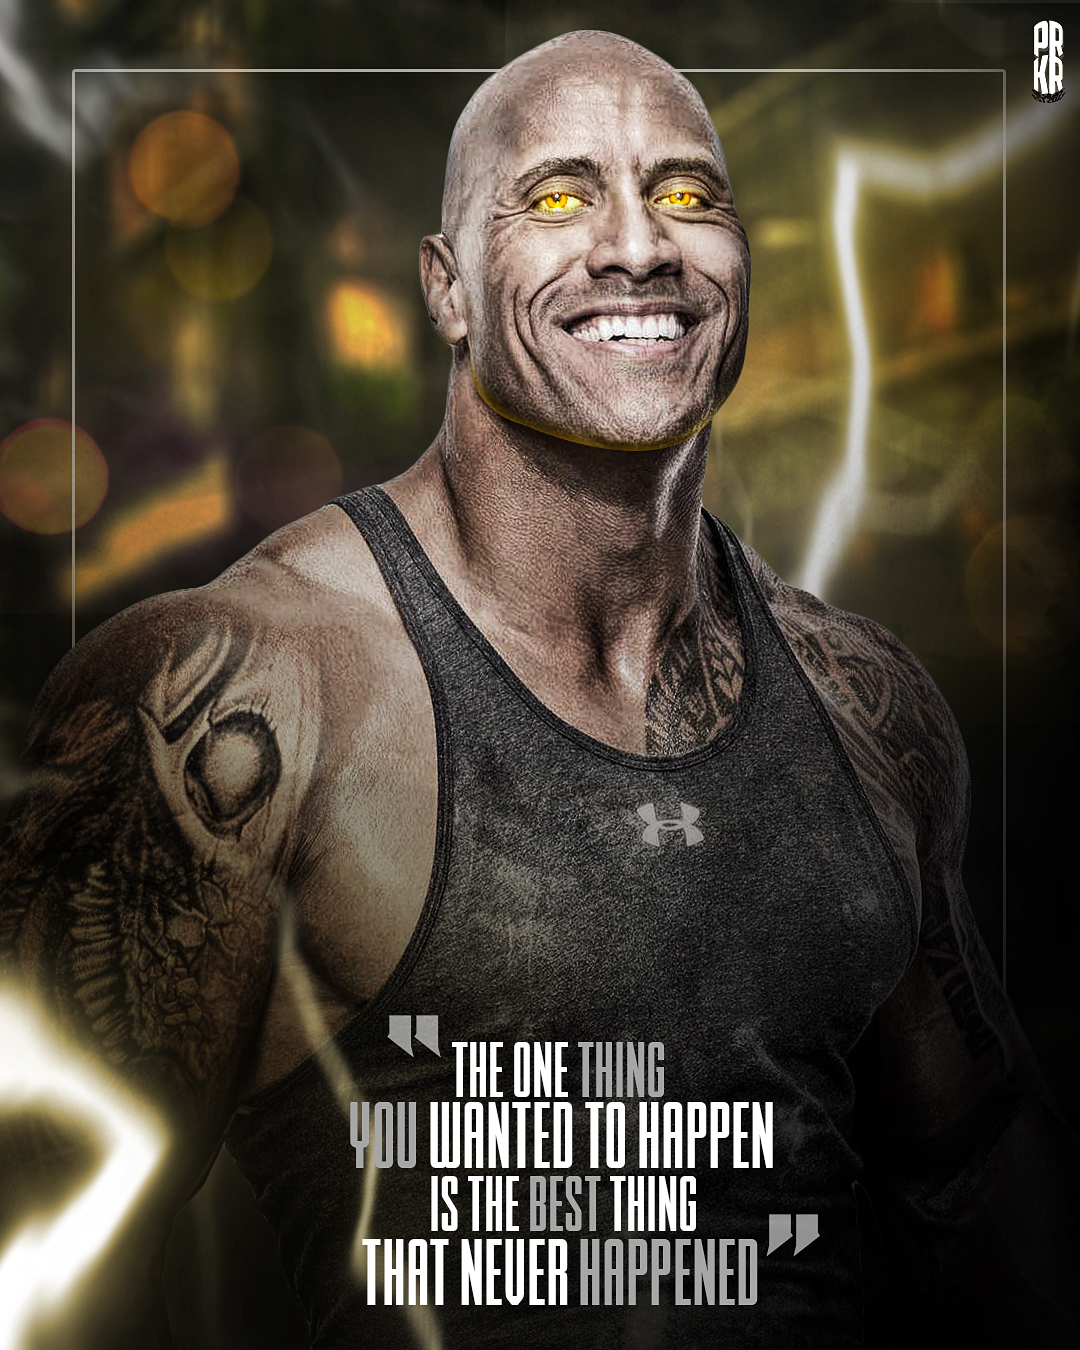 The Rock - Quote (New Tattoo) by PRKRDesigns on DeviantArt